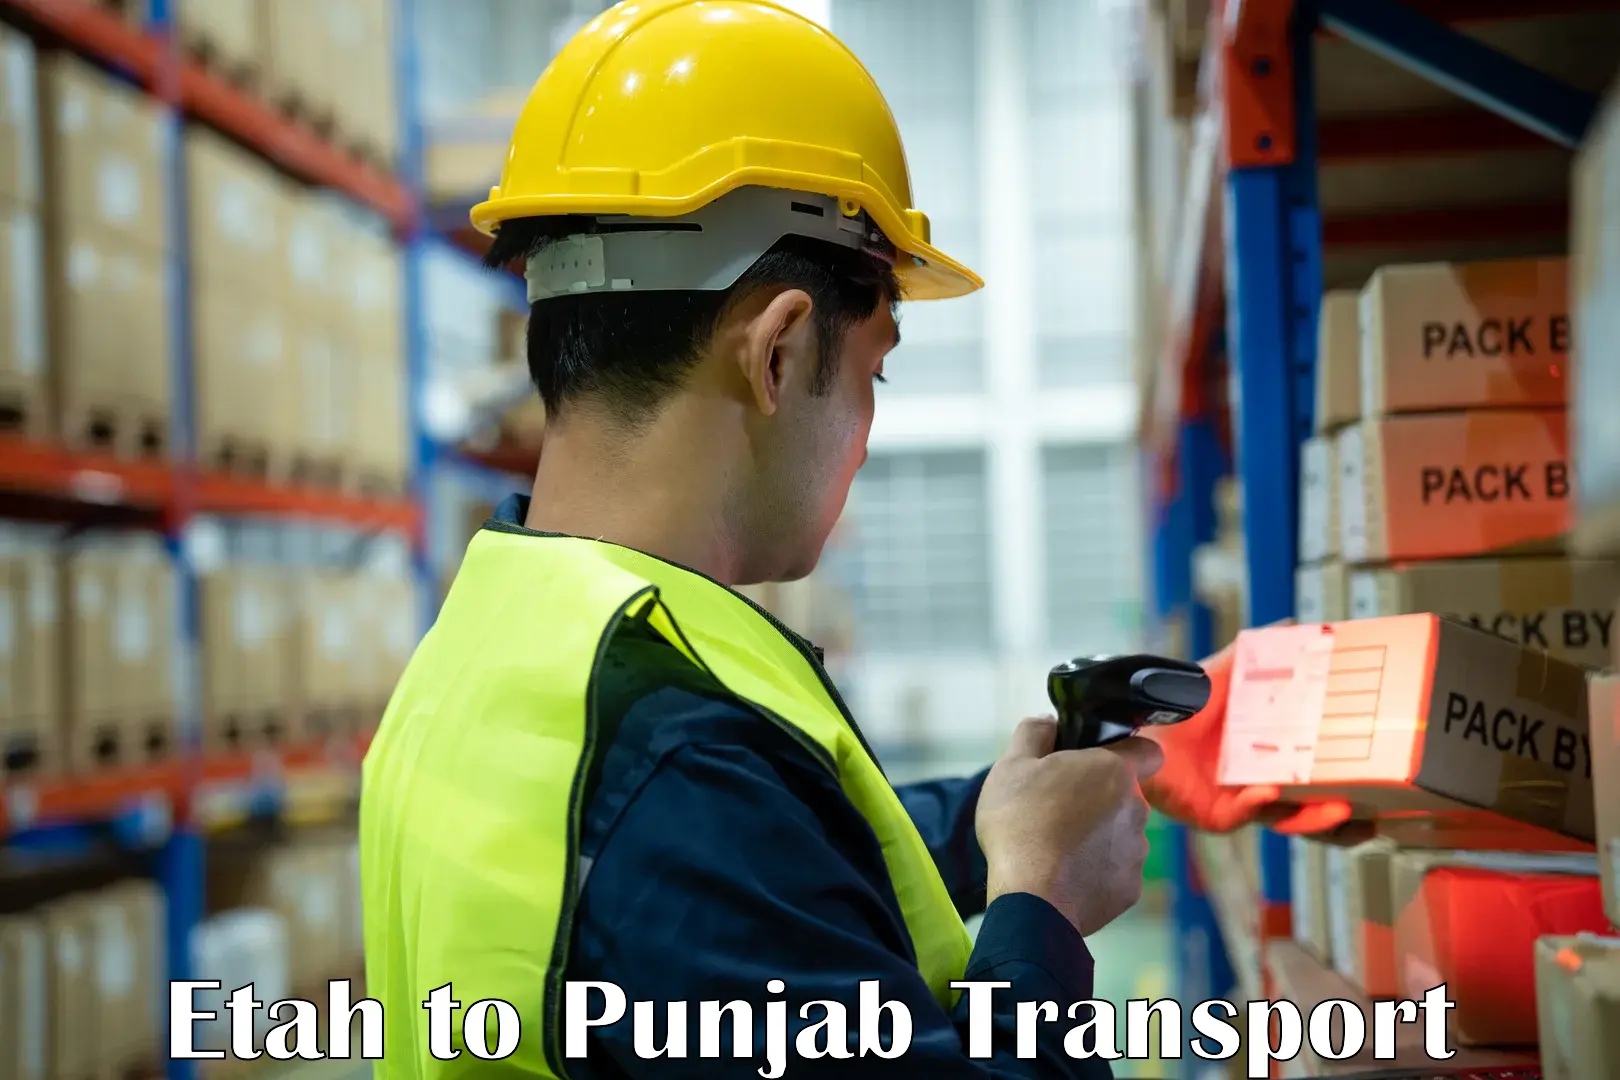 Express transport services Etah to Sultanpur Lodhi